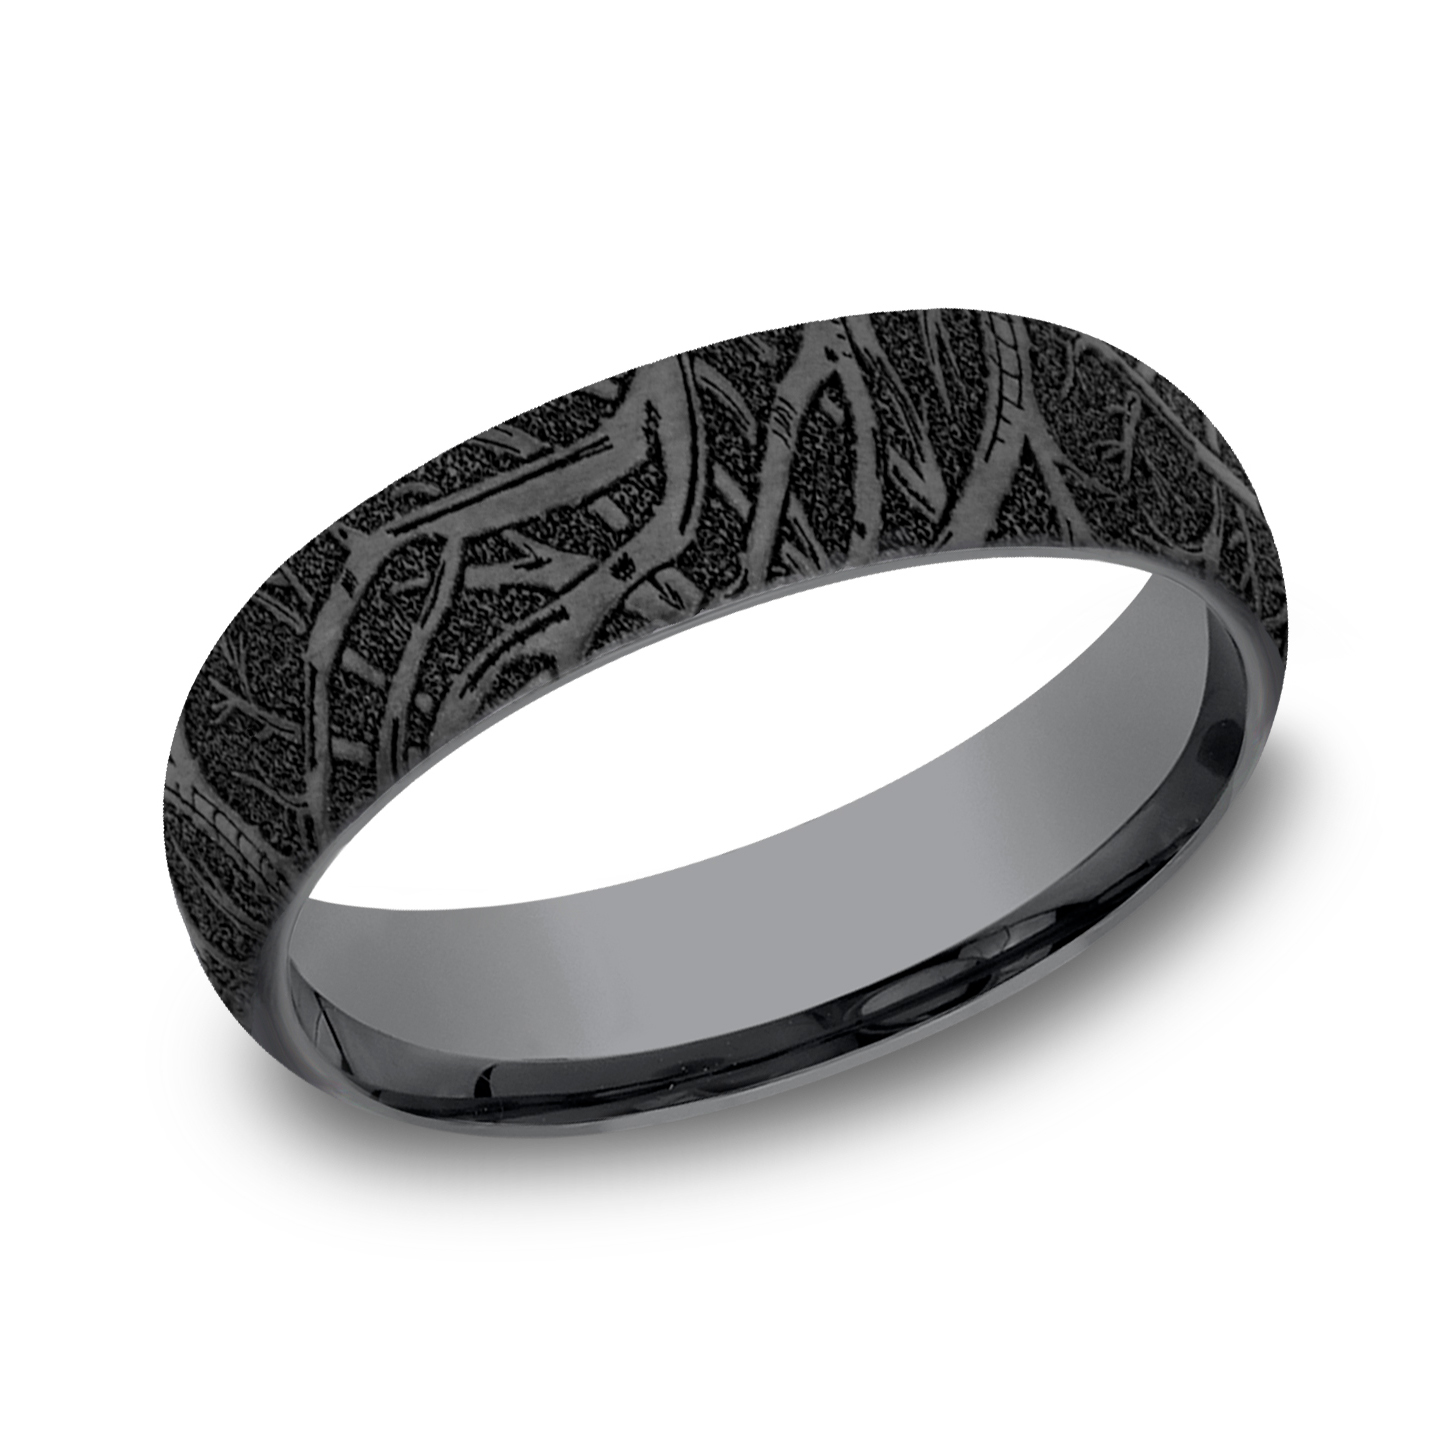 Benchmark Enchanted Forest Darkened Tantalum Comfort Fit Band | 6mm | Size 6.5